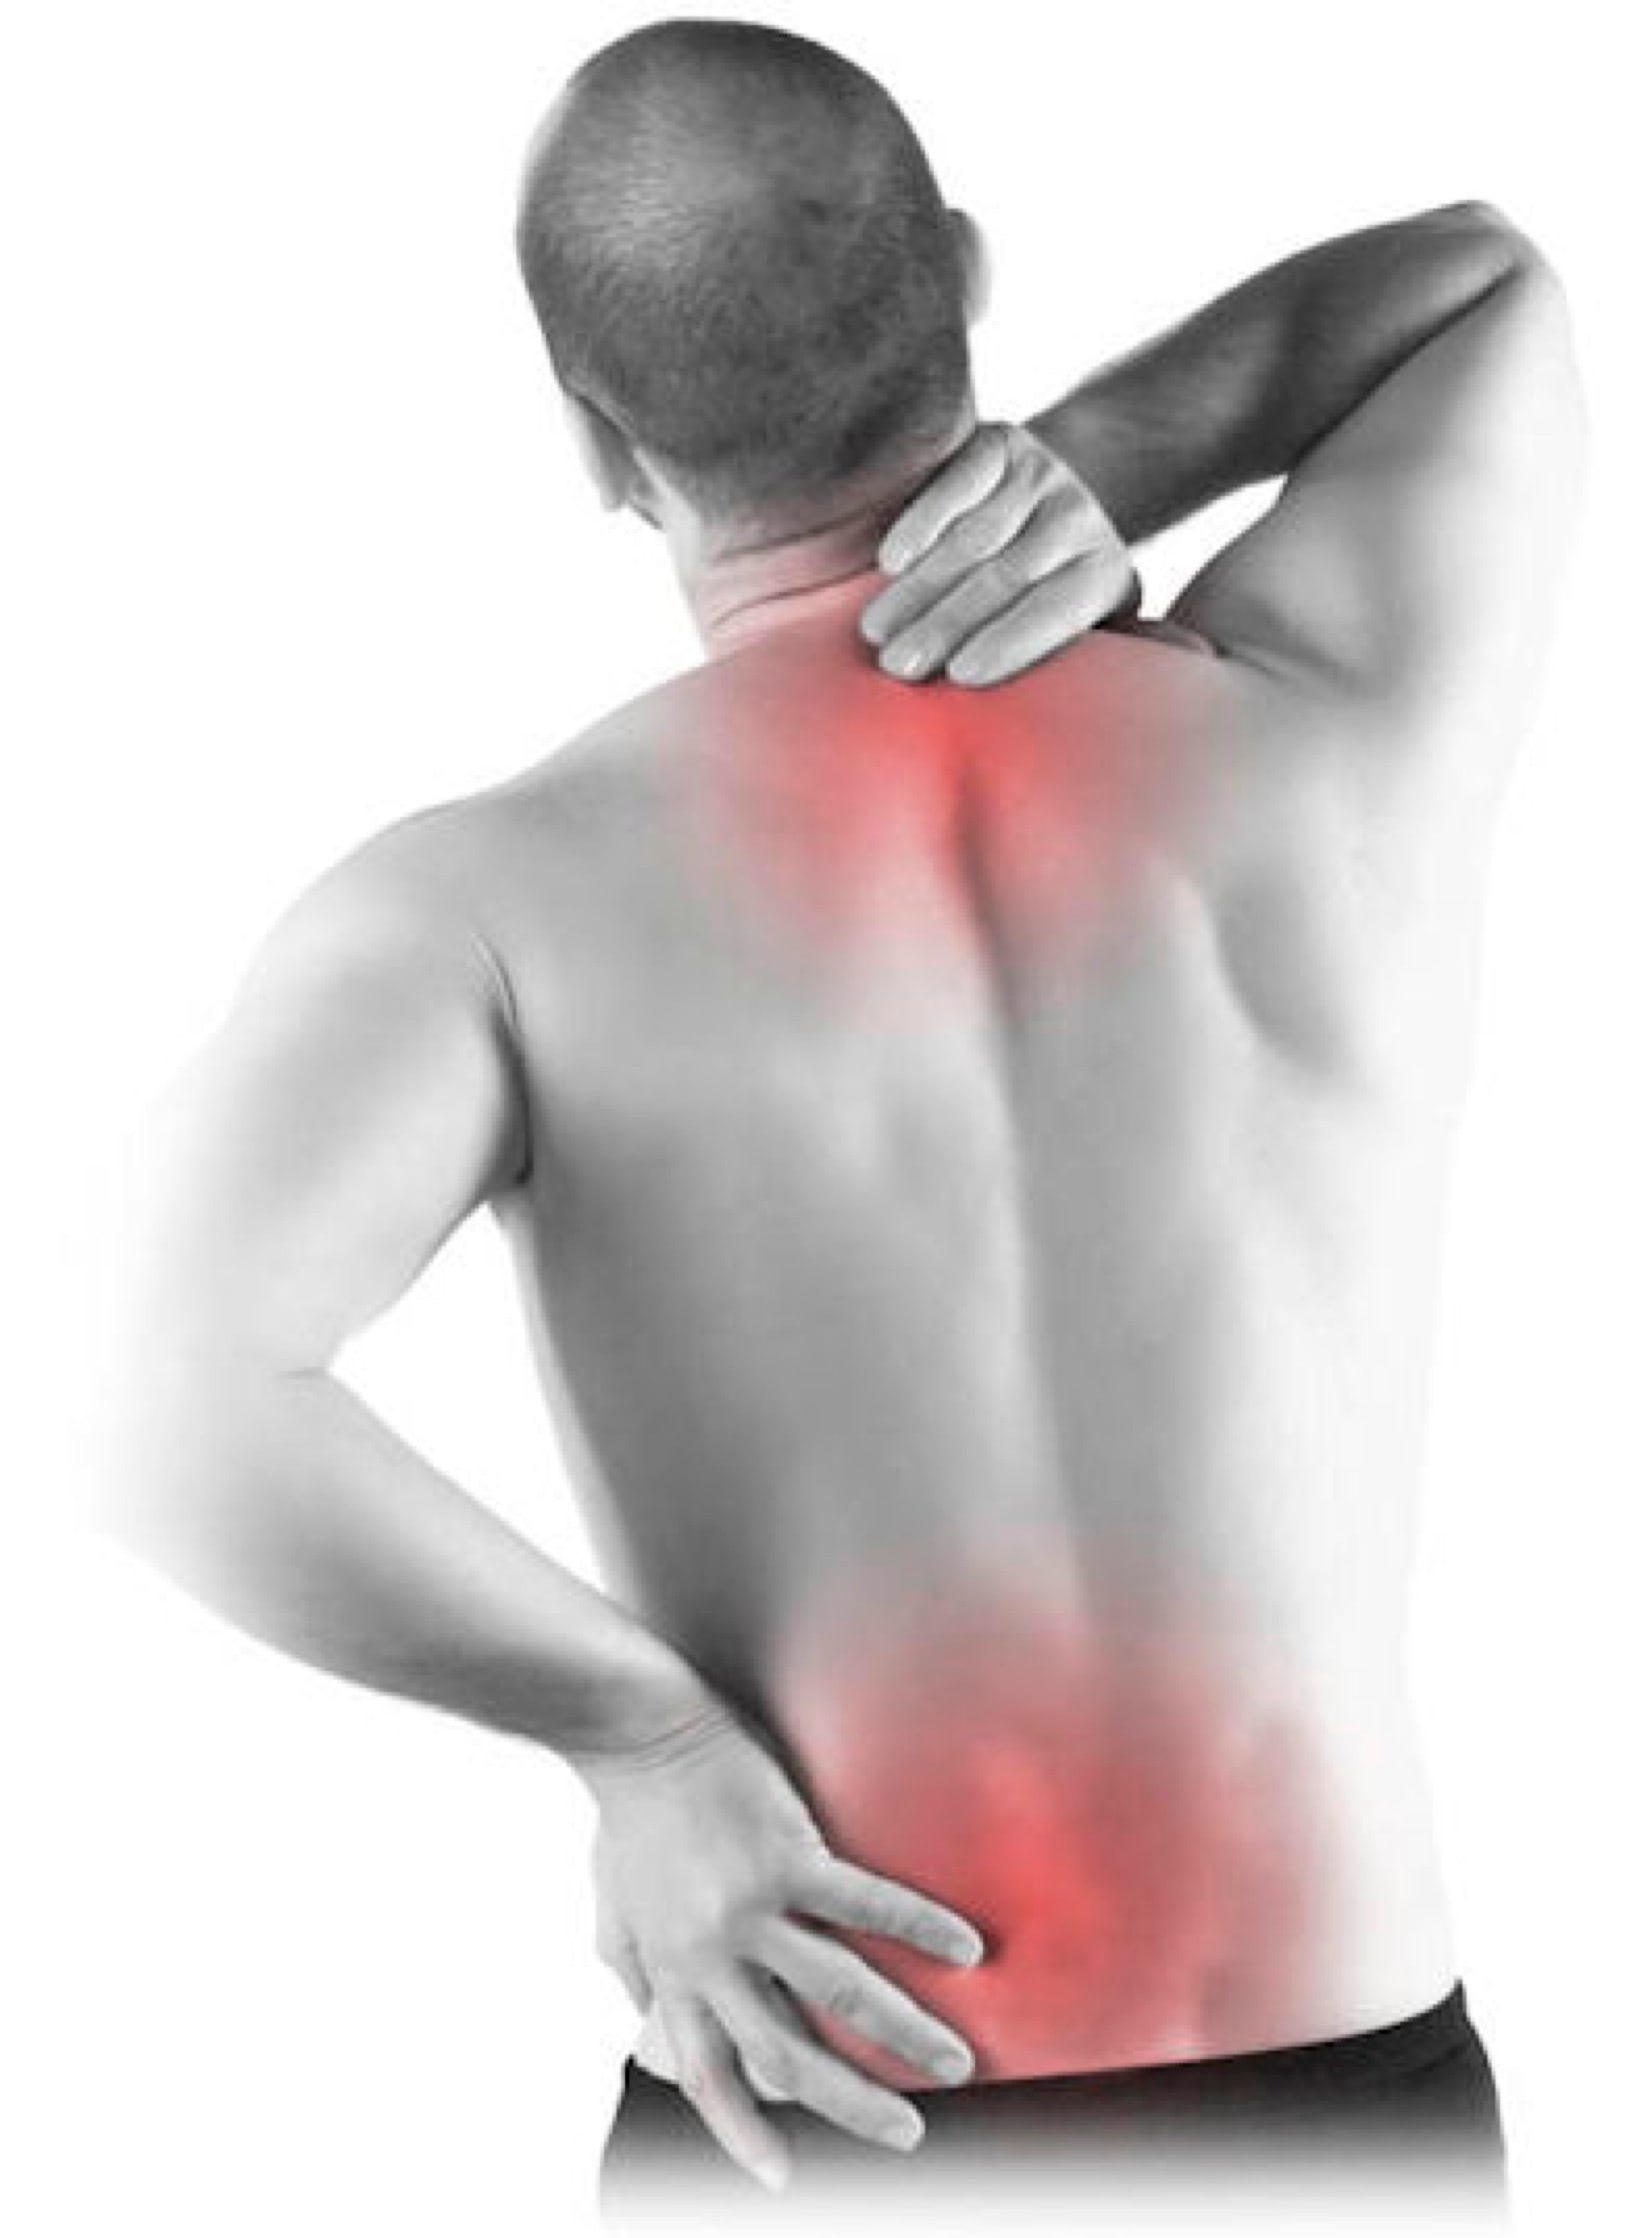 acupuncture for back pain london